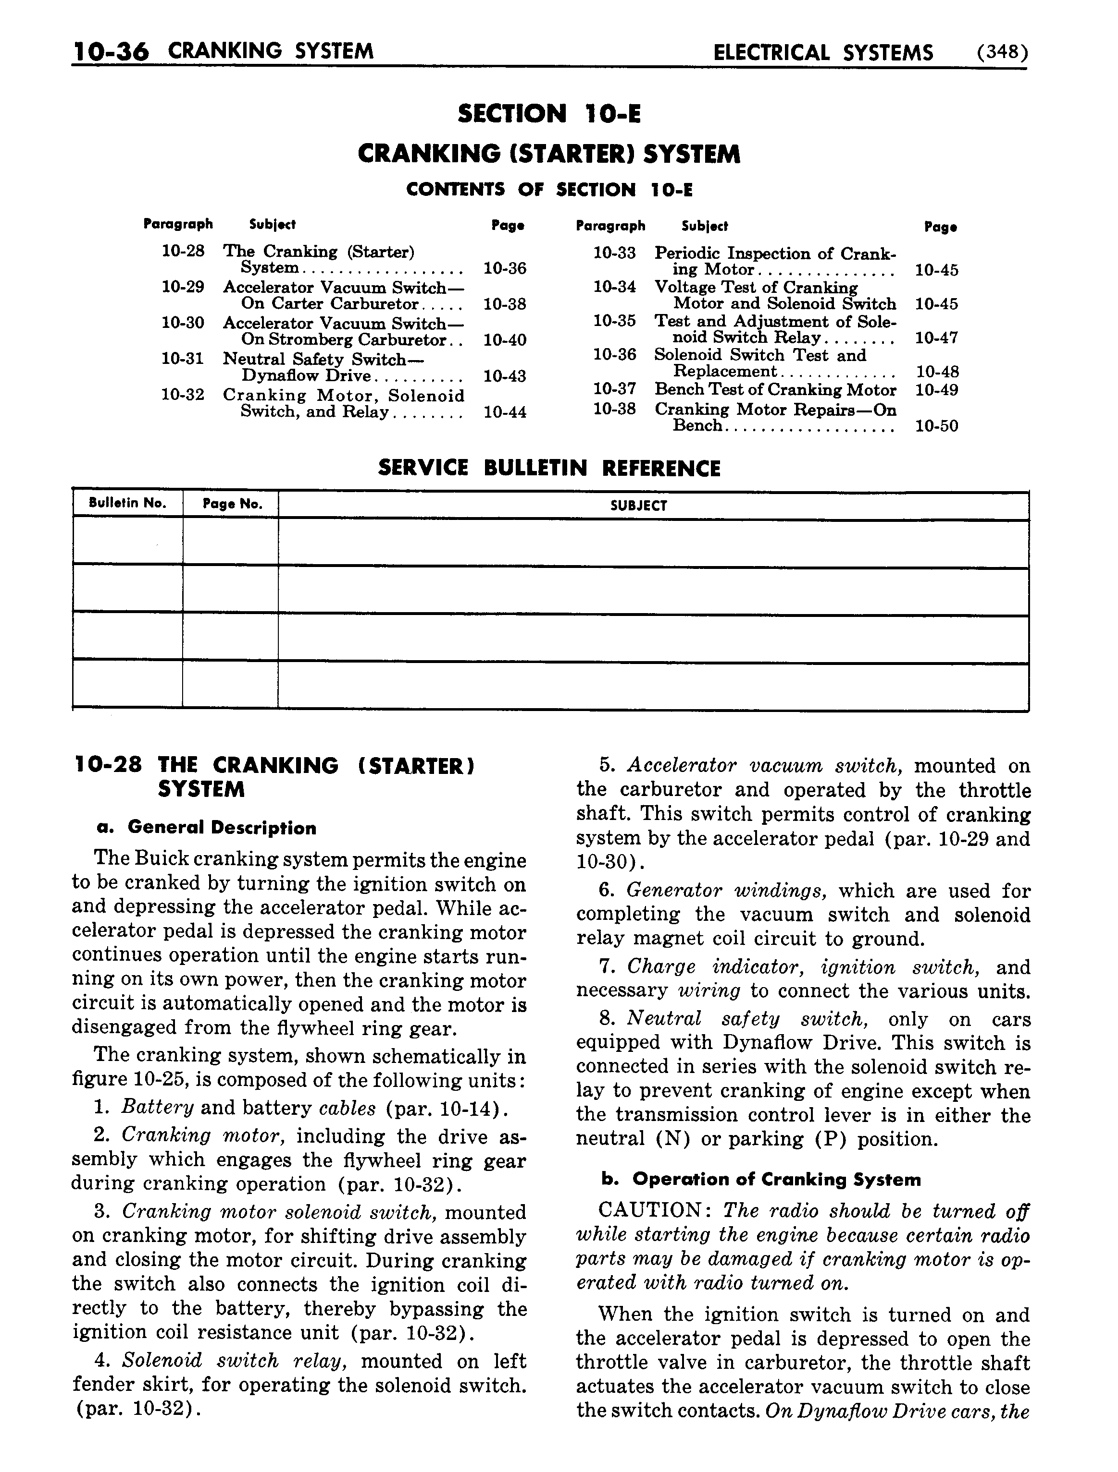 n_11 1954 Buick Shop Manual - Electrical Systems-036-036.jpg